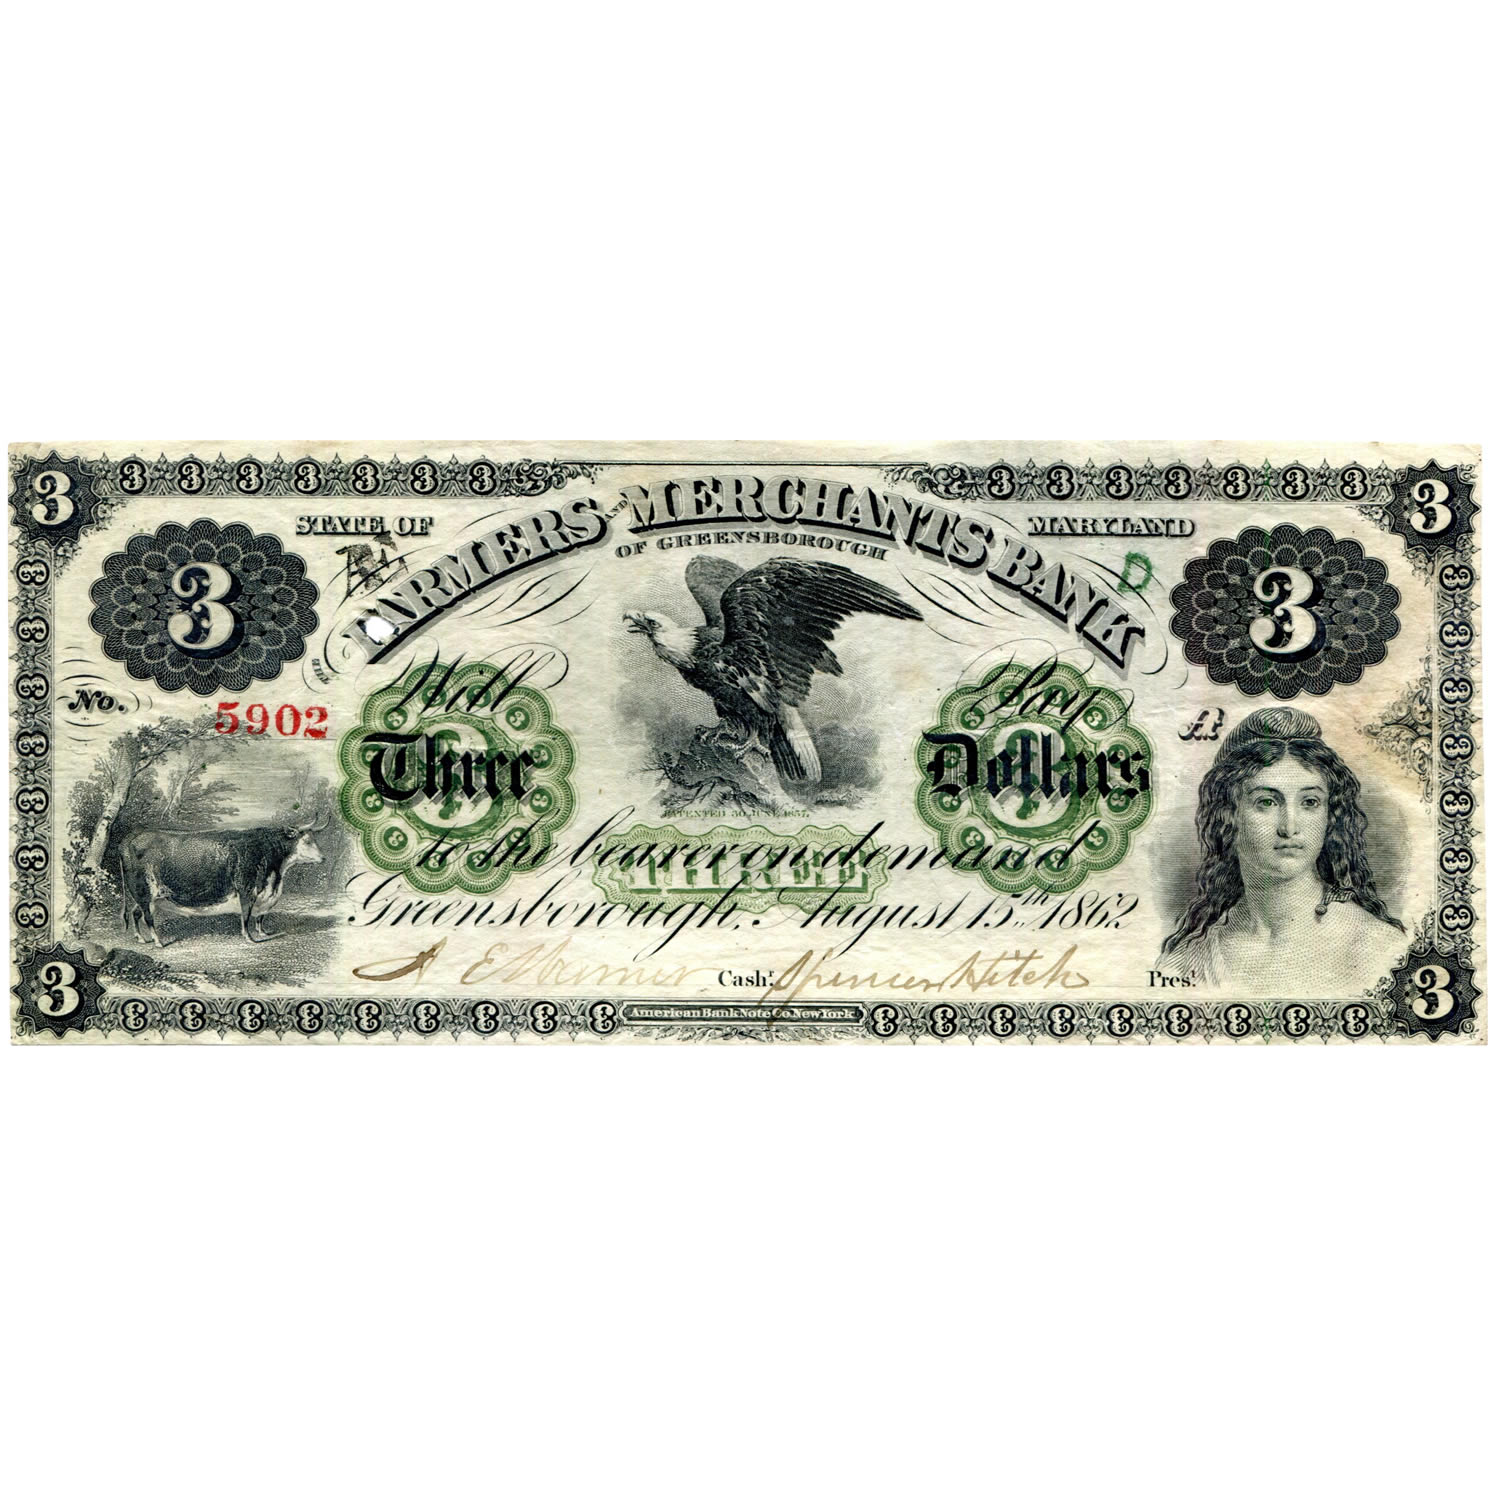 Obsolete Currency